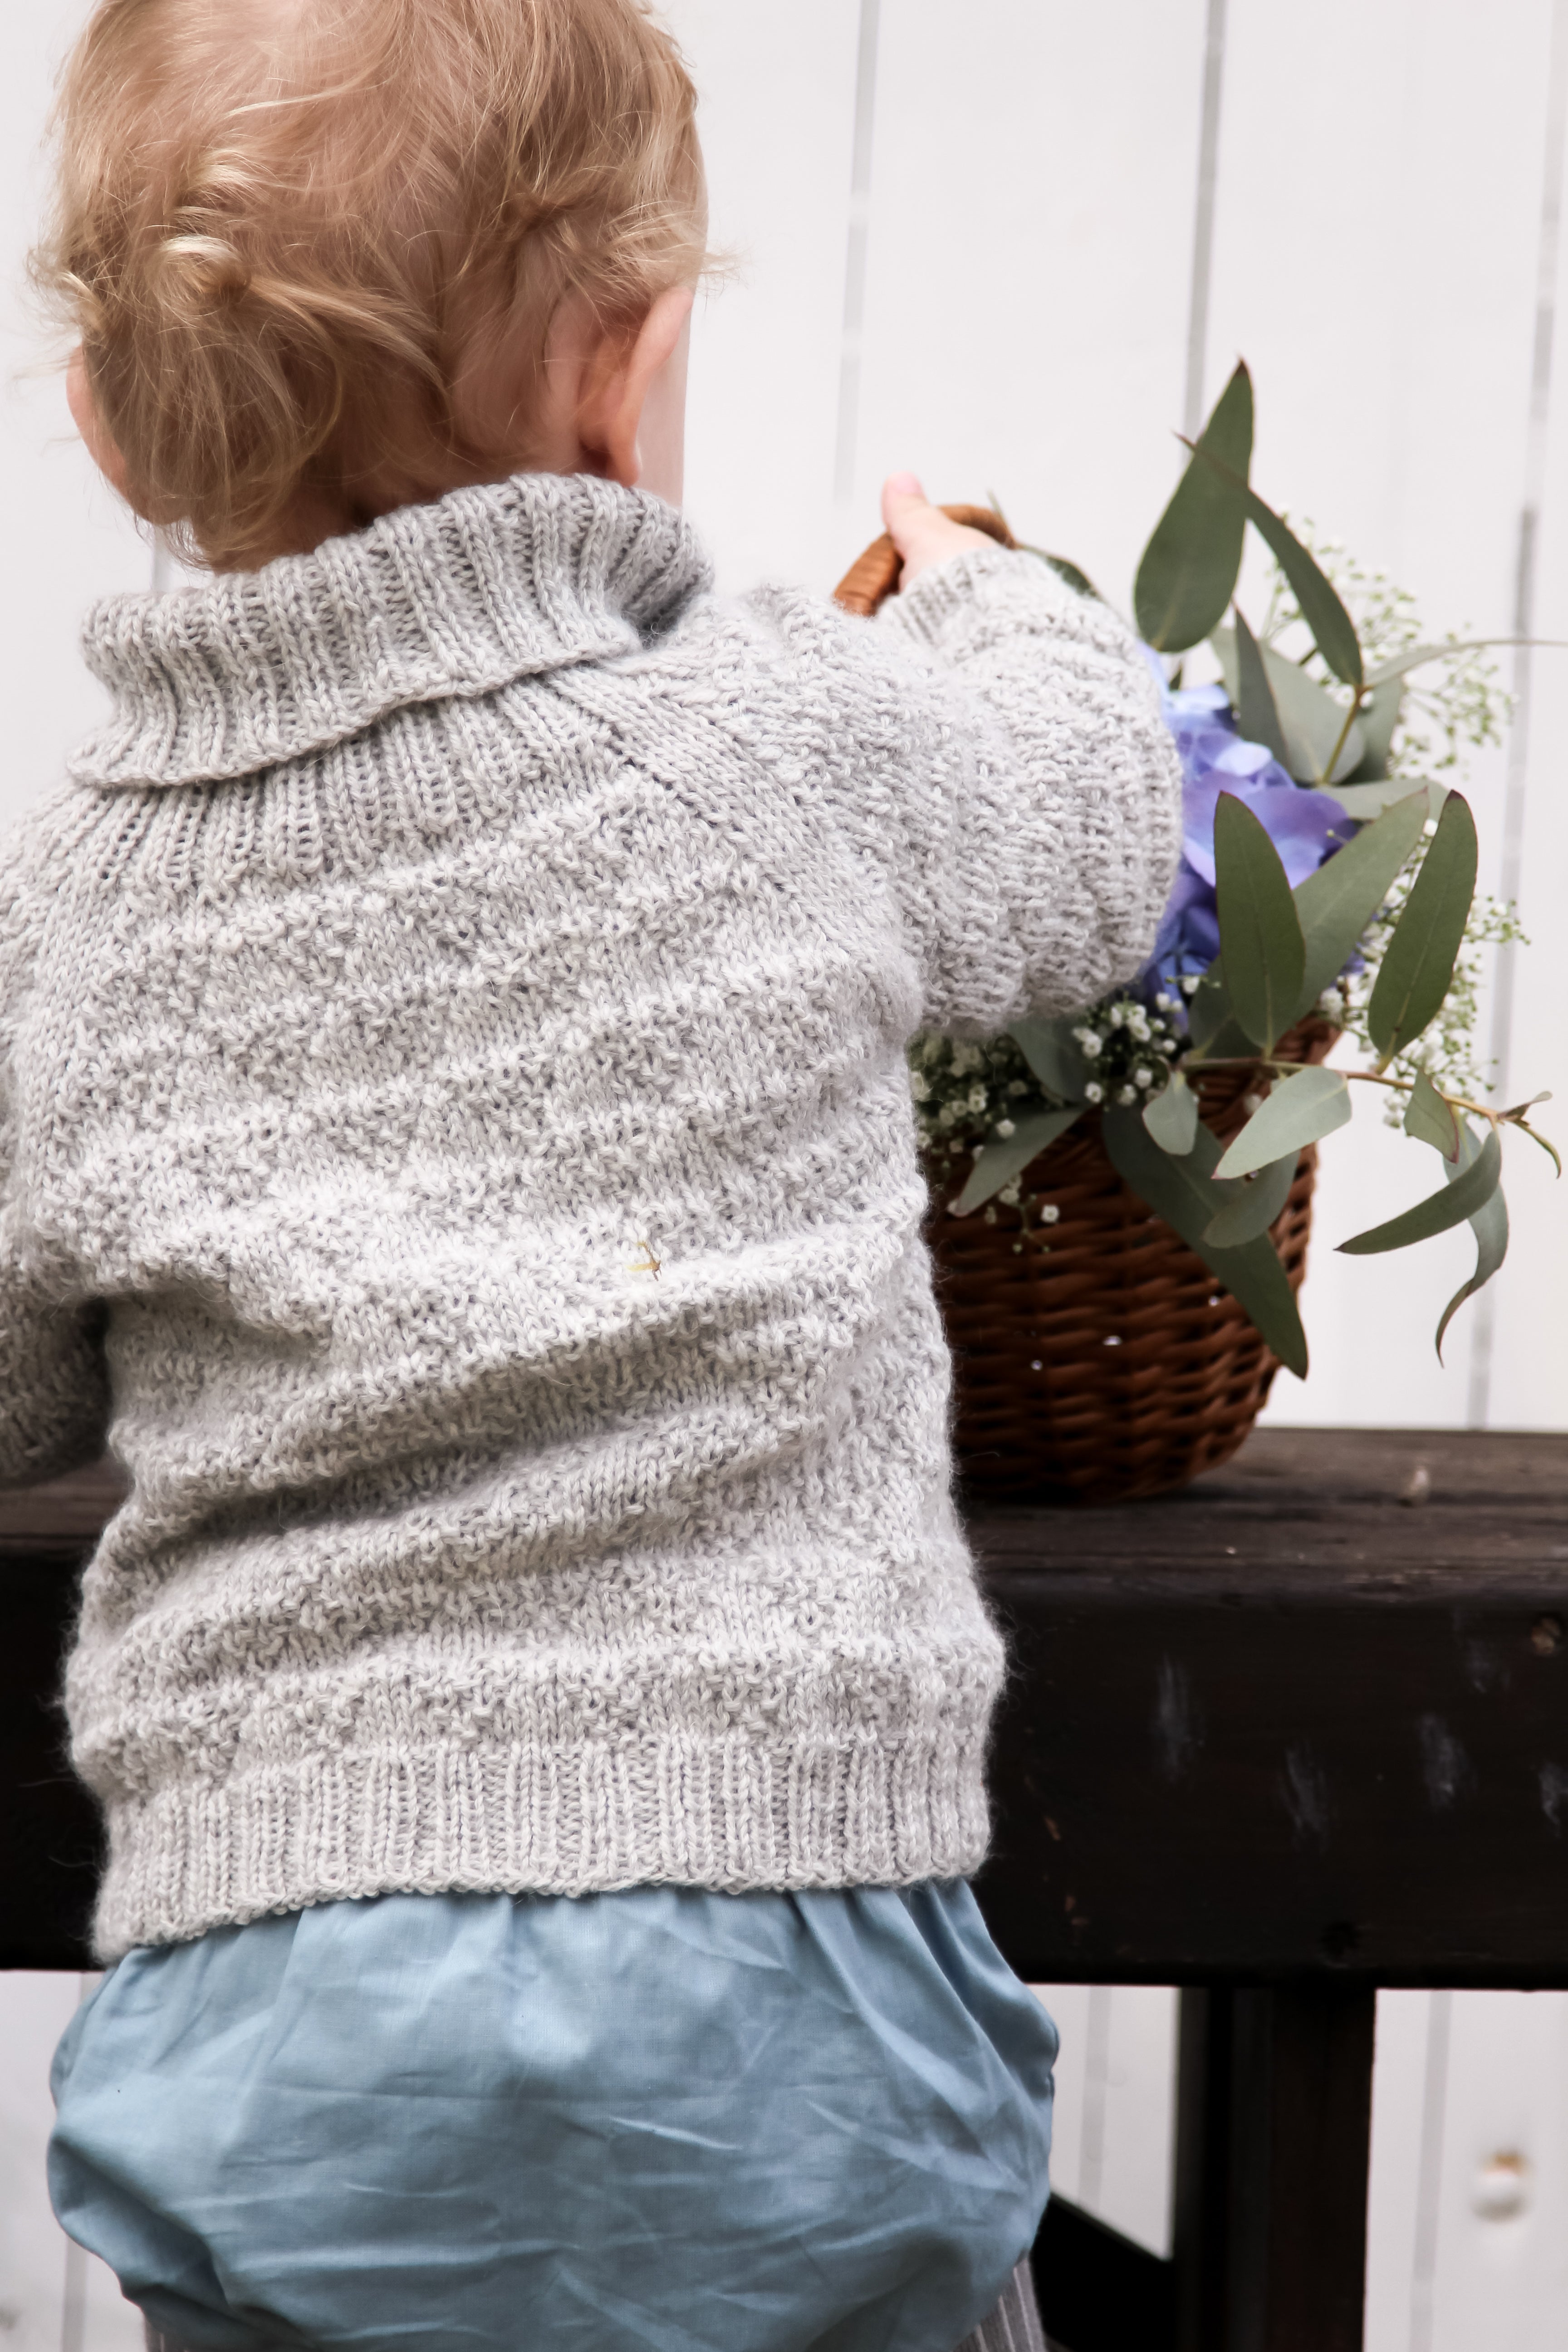 Politistation Sult forbinde Nordic Autumn Sweater – Knit By TrineP